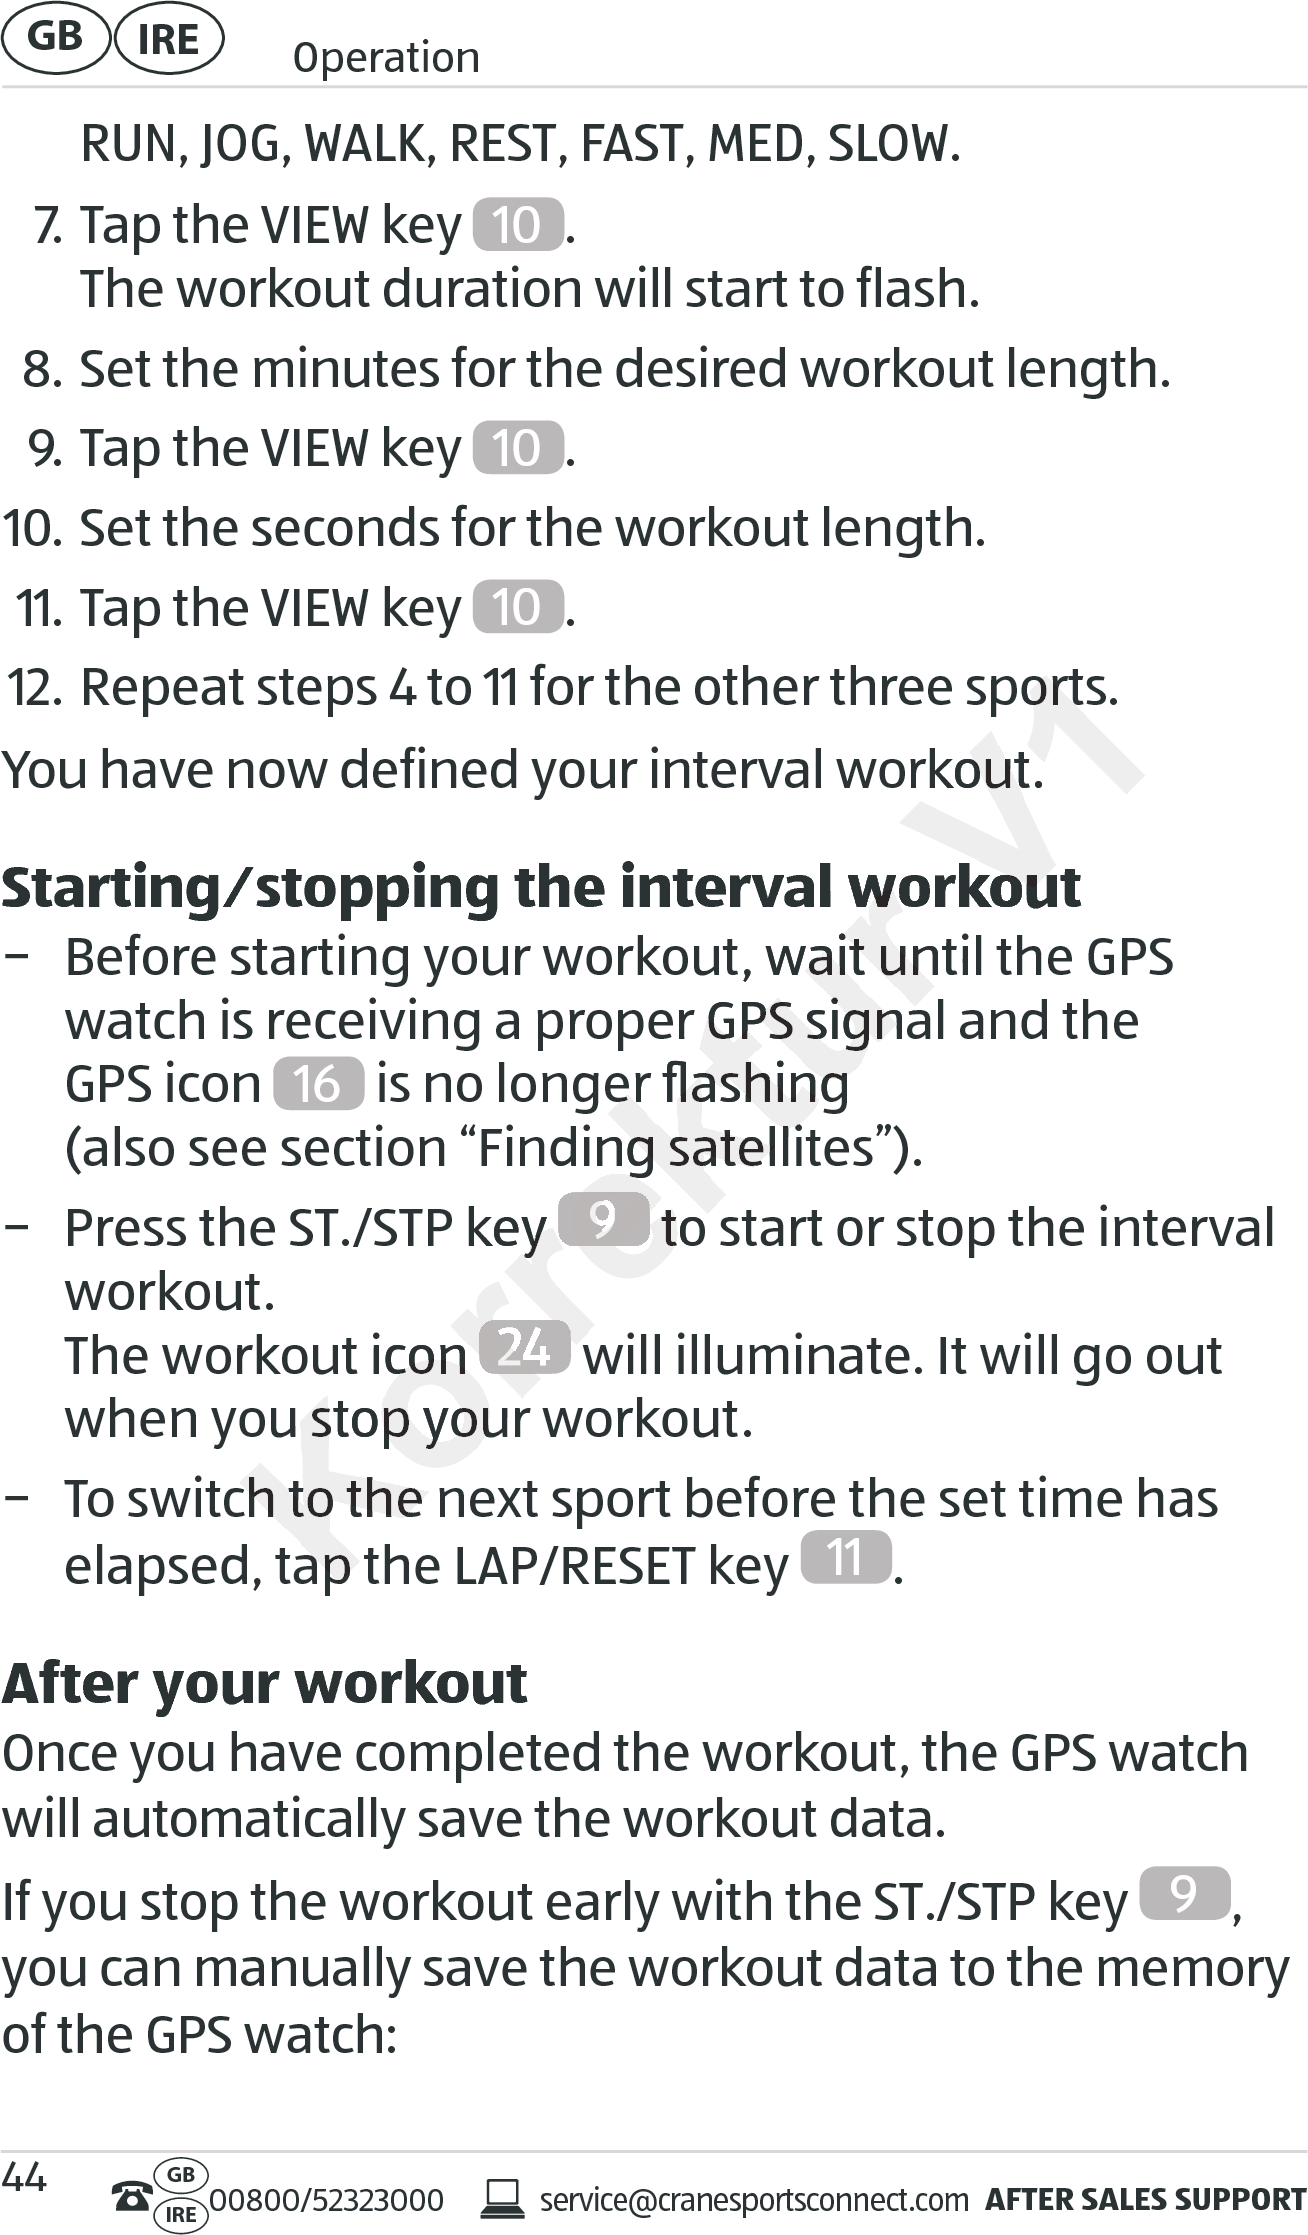 AFTER SALES SUPPORTservice@cranesportsconnect.comGBIRE 00800/52323000IRE OperationGB 44RUN, JOG, WALK, REST, FAST, MED, SLOW.7. Tap the VIEW key  10 . The workout duration will start to flash.8. Set the minutes for the desired workout length.9. Tap the VIEW key  10 .10. Set the seconds for the workout length.11. Tap the VIEW key  10 .12. Repeat steps 4 to 11 for the other three sports.You have now defined your interval workout. Starting⁄stopping the interval workout − Before starting your workout, wait until the GPS watch is receiving a proper GPS signal and the  GPS icon  16  is no longer ﬂashing  (also see section “Finding satellites”). − Press the ST./STP key  9 to start or stop the interval workout. The workout icon  24  will illuminate. It will go out when you stop your workout. − To switch to the next sport before the set time has elapsed, tap the LAP/RESET key  11 .After your workoutOnce you have completed the workout, the GPS watch will automatically save the workout data.If you stop the workout early with the ST./STP key  9, you can manually save the workout data to the memory of the GPS watch:Korrektur Starting⁄stopping the interval workoutStarting⁄stopping the interval workout− Before starting your workout, wait until the GPS − Before starting your workout, wait until the GPS ch is receiving a proper GPS signal and the  ch is receiving a proper GPS signal and the   is no longer ﬂashing   is no longer ﬂashing  (also see section “Finding satellites”).(also see section “Finding satellites”).T./STP key T./STP key Korrektur 9 to start or stop the interval  to start or stop the interval  to start or stop the interval The workout icon The workout icon Korrektur 24 will illuminate. It will go out  will illuminate. It will go out  will illuminate. It will go out when you stop your workout.when you stop your workout.ch to the next sport before the set time has ch to the next sport before the set time has elapsed, tap the LAP/RESET key elapsed, tap the LAP/RESET key V1o 11 for the other three sports.o 11 for the other three sports.You have now defined your interval workout. You have now defined your interval workout. Starting⁄stopping the interval workoutStarting⁄stopping the interval workout